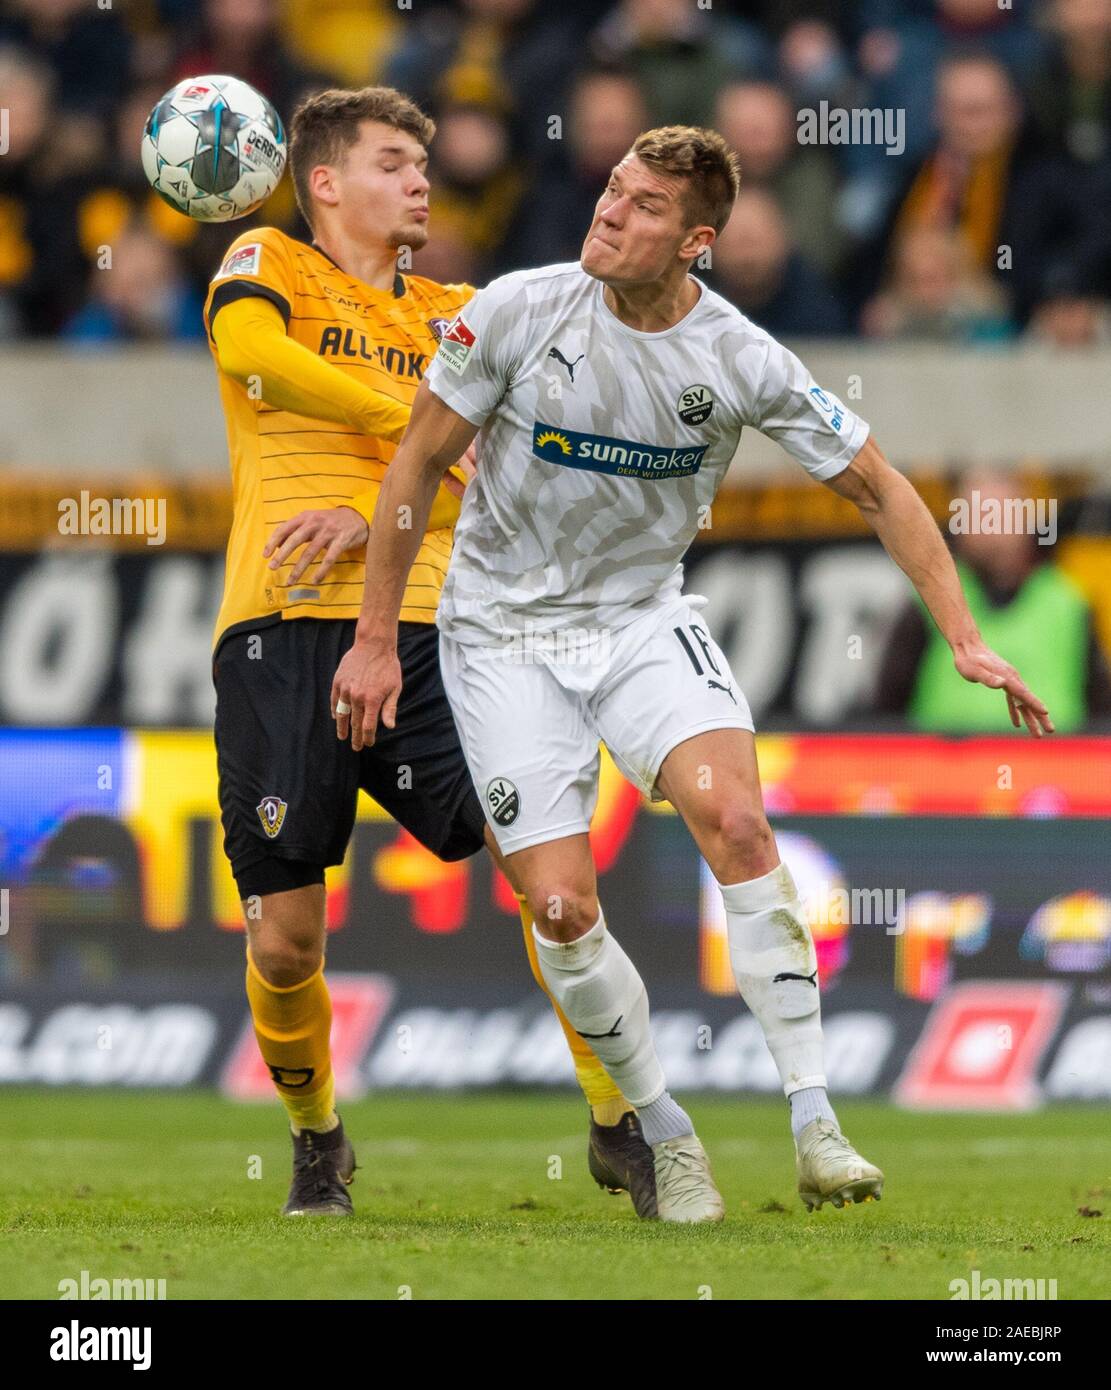 Dresden, Germany. 08th Dec, 2019. Soccer: 2nd Bundesliga, SG Dynamo Dresden - SV Sandhausen, 16th matchday, in the Rudolf Harbig Stadium. Dynamos Jannis Nikolaou (l) against Sandhausens Besar Halimi. Credit: Robert Michael/dpa-Zentralbild/dpa - IMPORTANT NOTE: In accordance with the requirements of the DFL Deutsche Fußball Liga or the DFB Deutscher Fußball-Bund, it is prohibited to use or have used photographs taken in the stadium and/or the match in the form of sequence images and/or video-like photo sequences./dpa/Alamy Live News Stock Photo